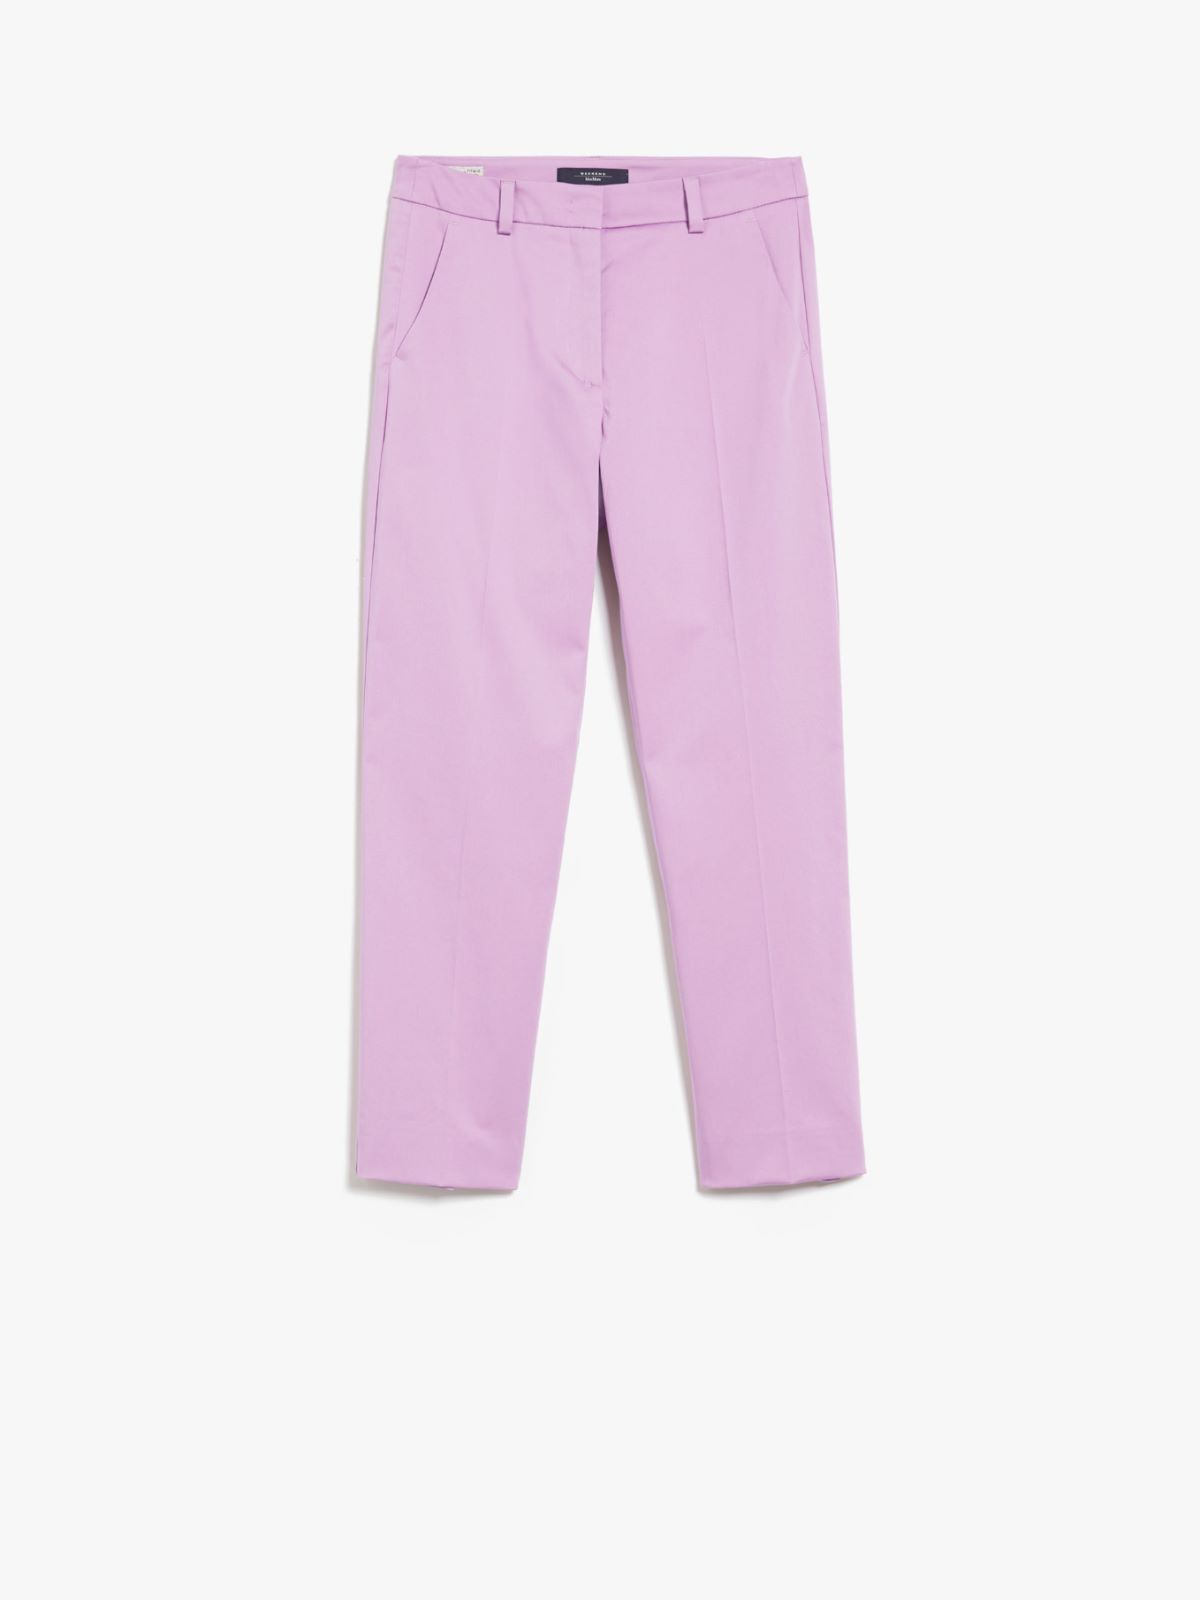 Trousers in stretch satin  - LILAC - Weekend Max Mara - 5